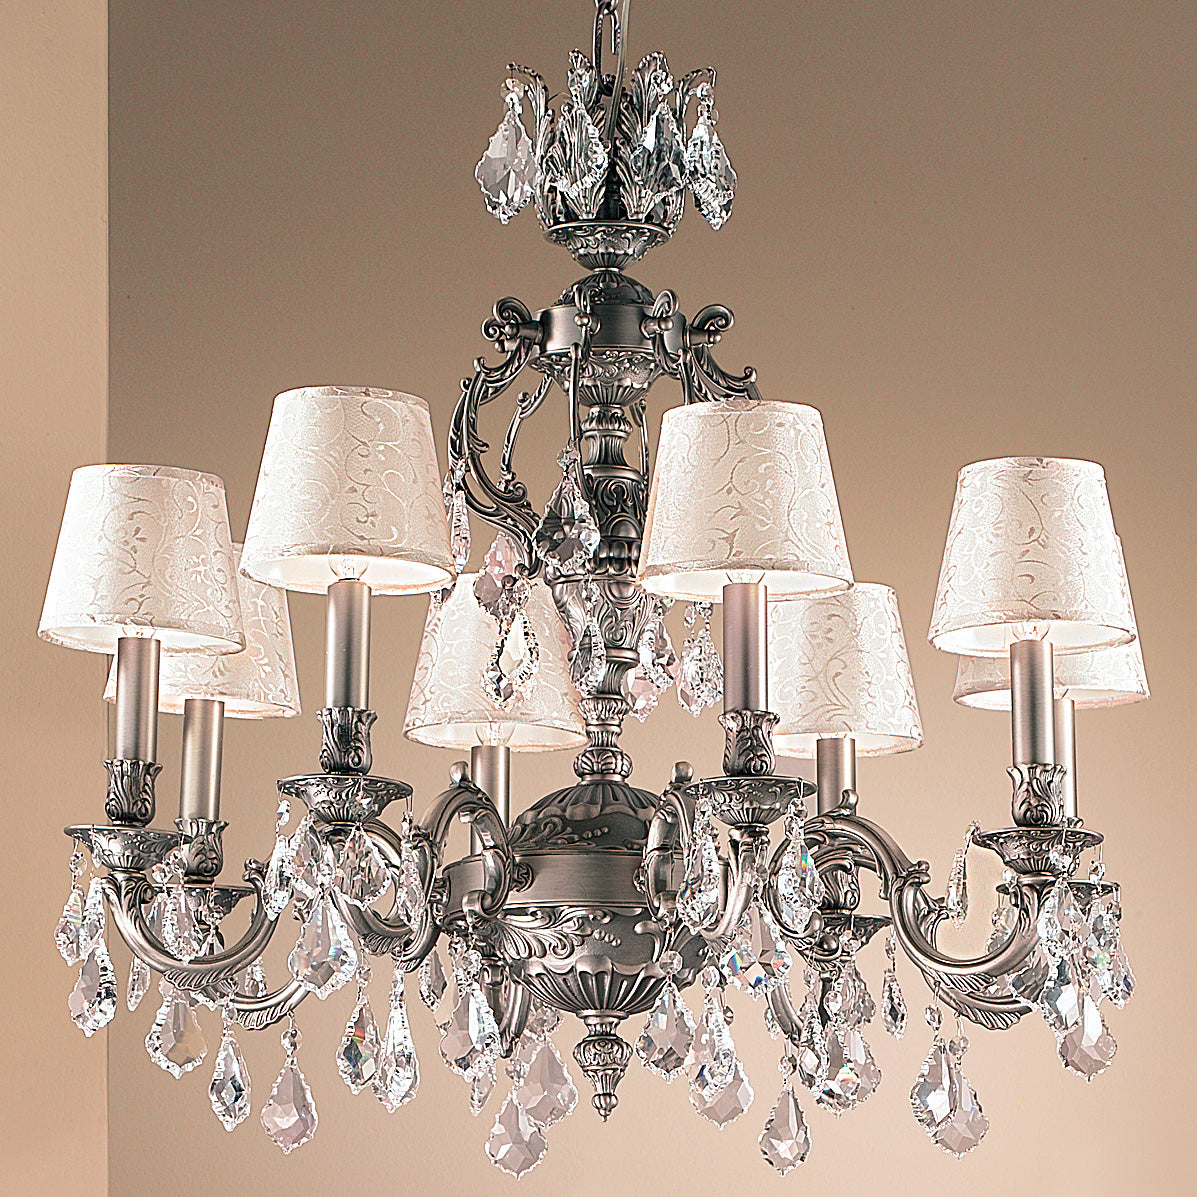 Classic Lighting 57378 FG CP Chateau Crystal Chandelier in French Gold (Imported from Spain)